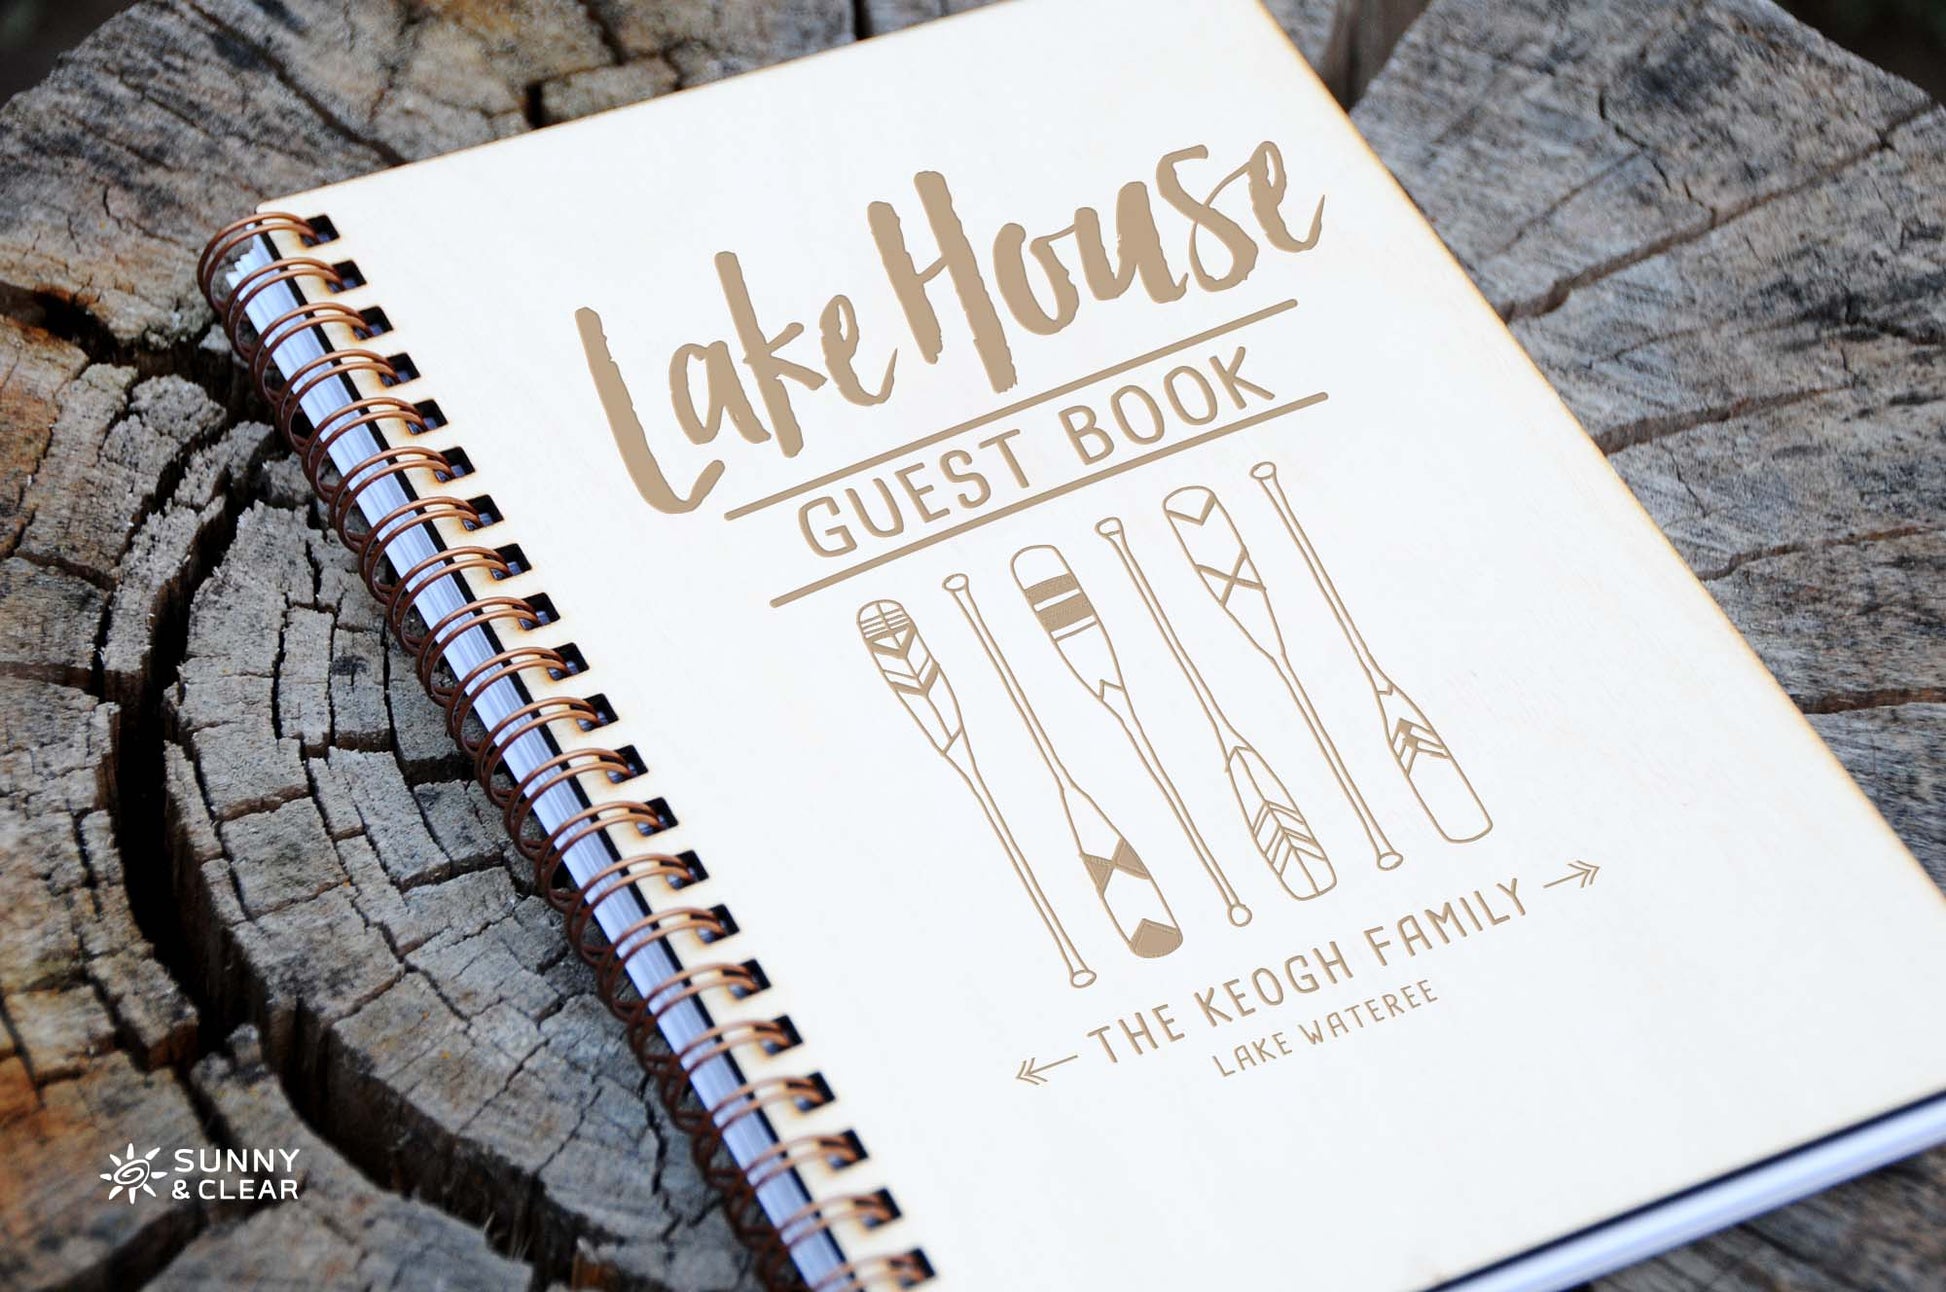 Guest Book Welcome to Your Home Away From Home: Visitor Guest Book for  Vacation Home  Perfect for a Rental Property, Holiday Home, Cabin and  Beach or Lake House: Co., Ipanema Paper